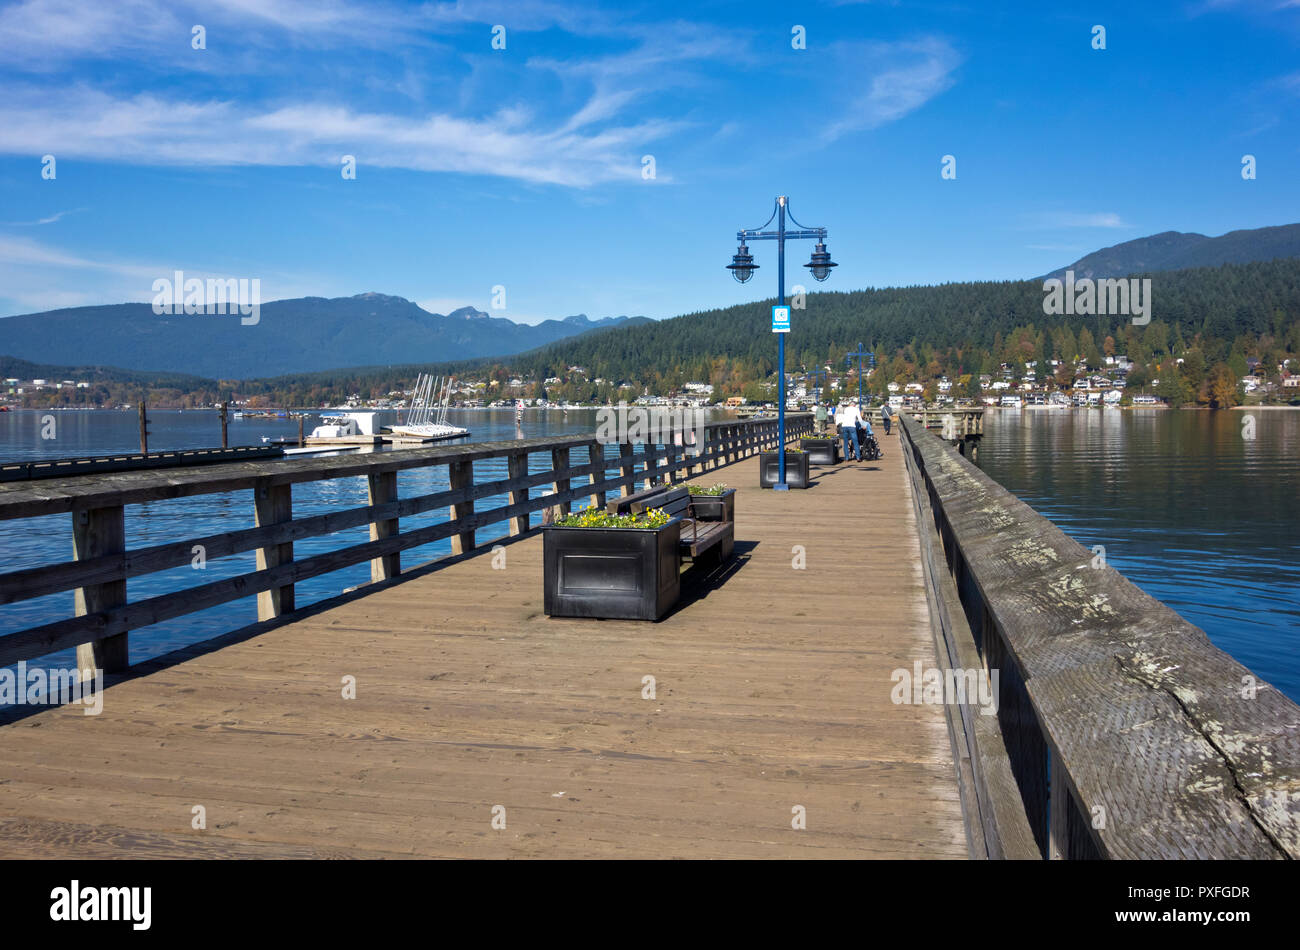 Pier at Rocky Point Park in Port Moody, BC, Canada. Port Moody, British Columbia. Waters of Burrard Inlet. Stock Photo